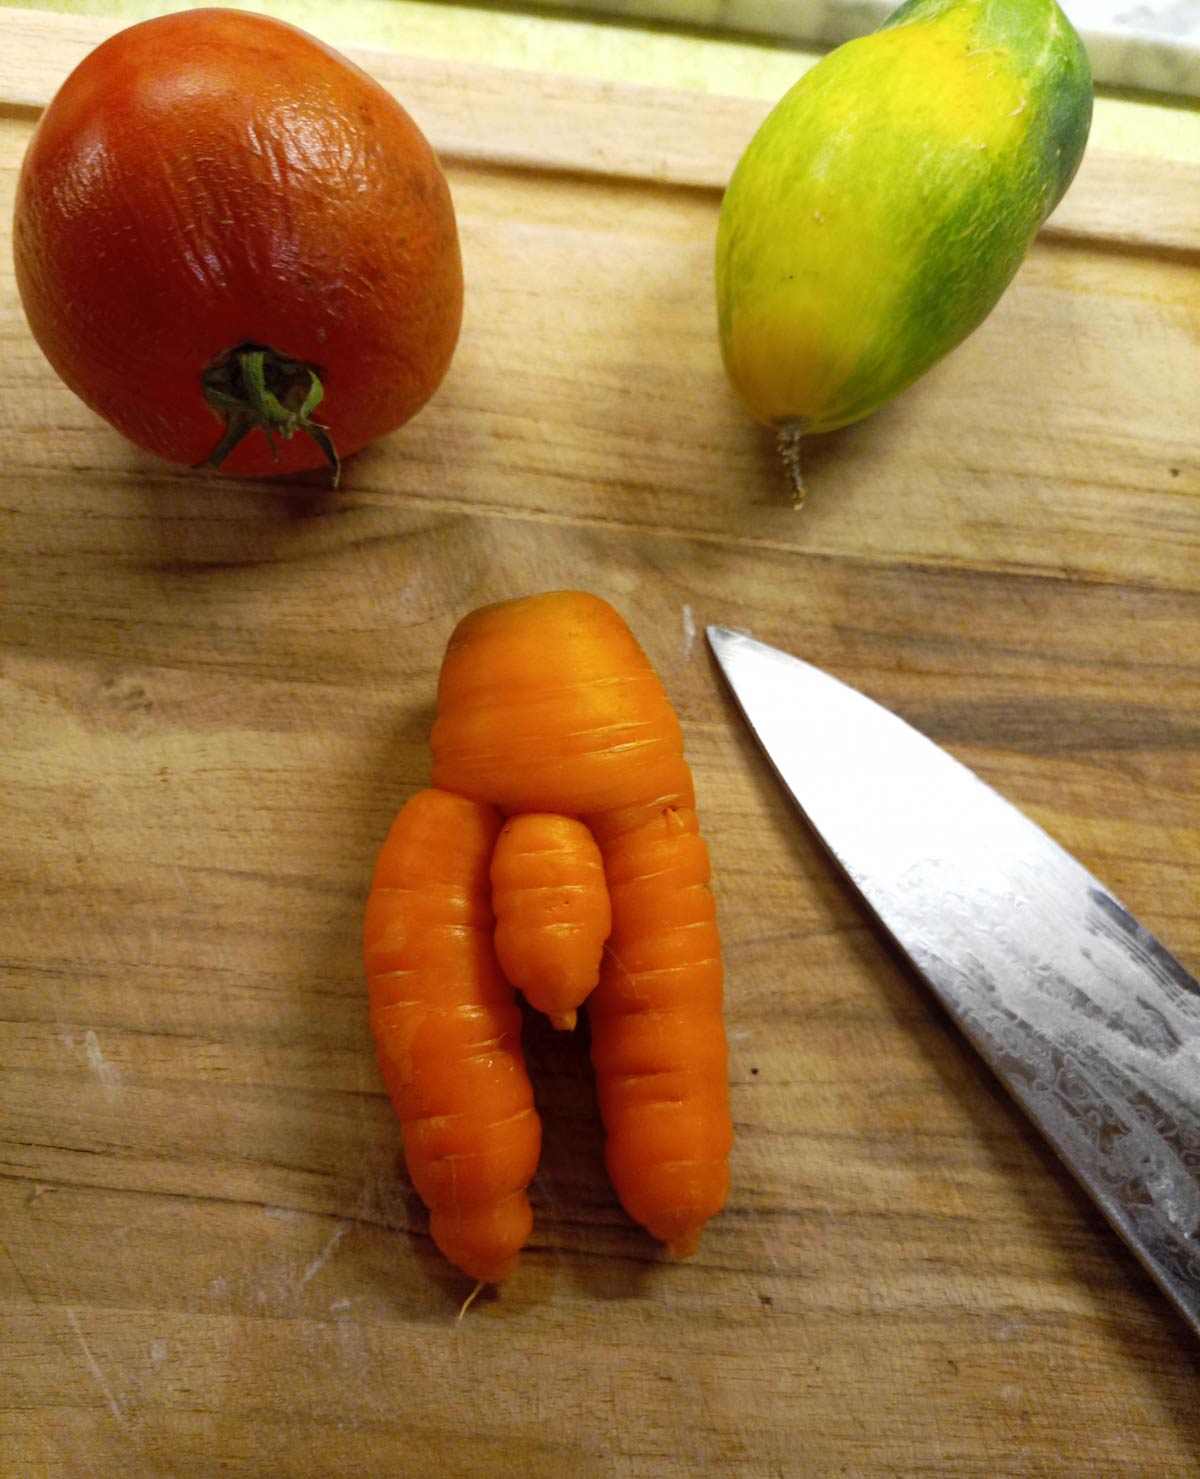 This carrot my wife grew